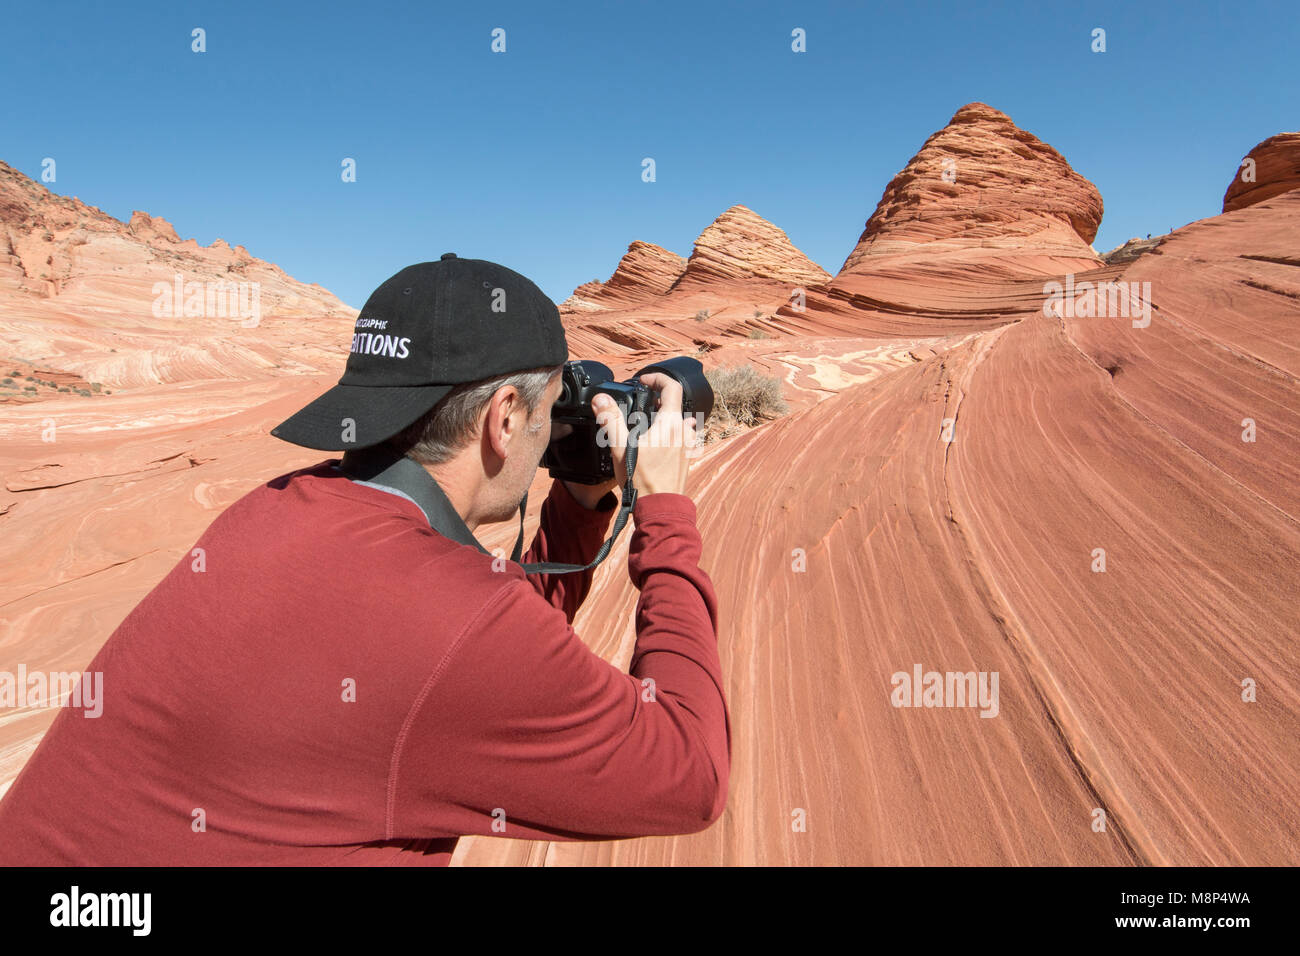 A man takes a picture of pyramid shaped sandstone formations in Coyote Buttes North. Stock Photo